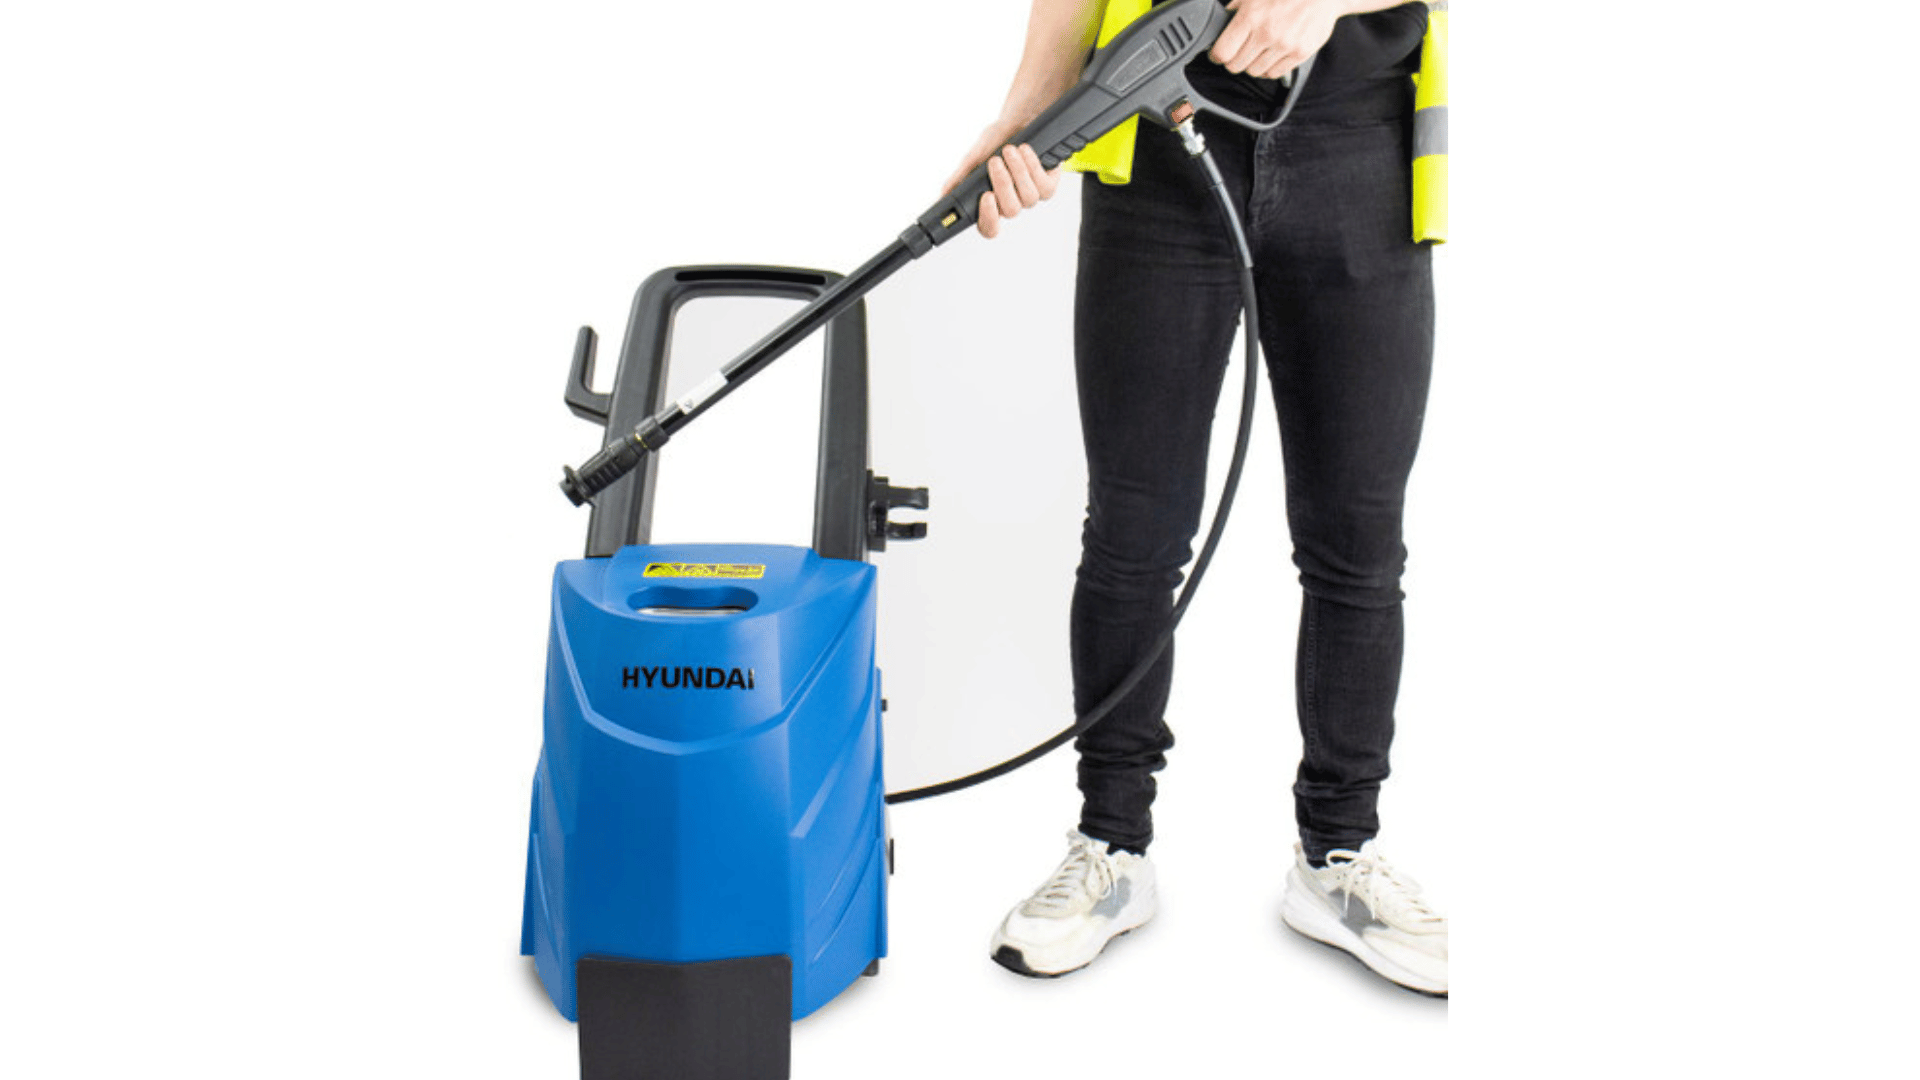 Guide to Cleaning Pressure Washer Pumo